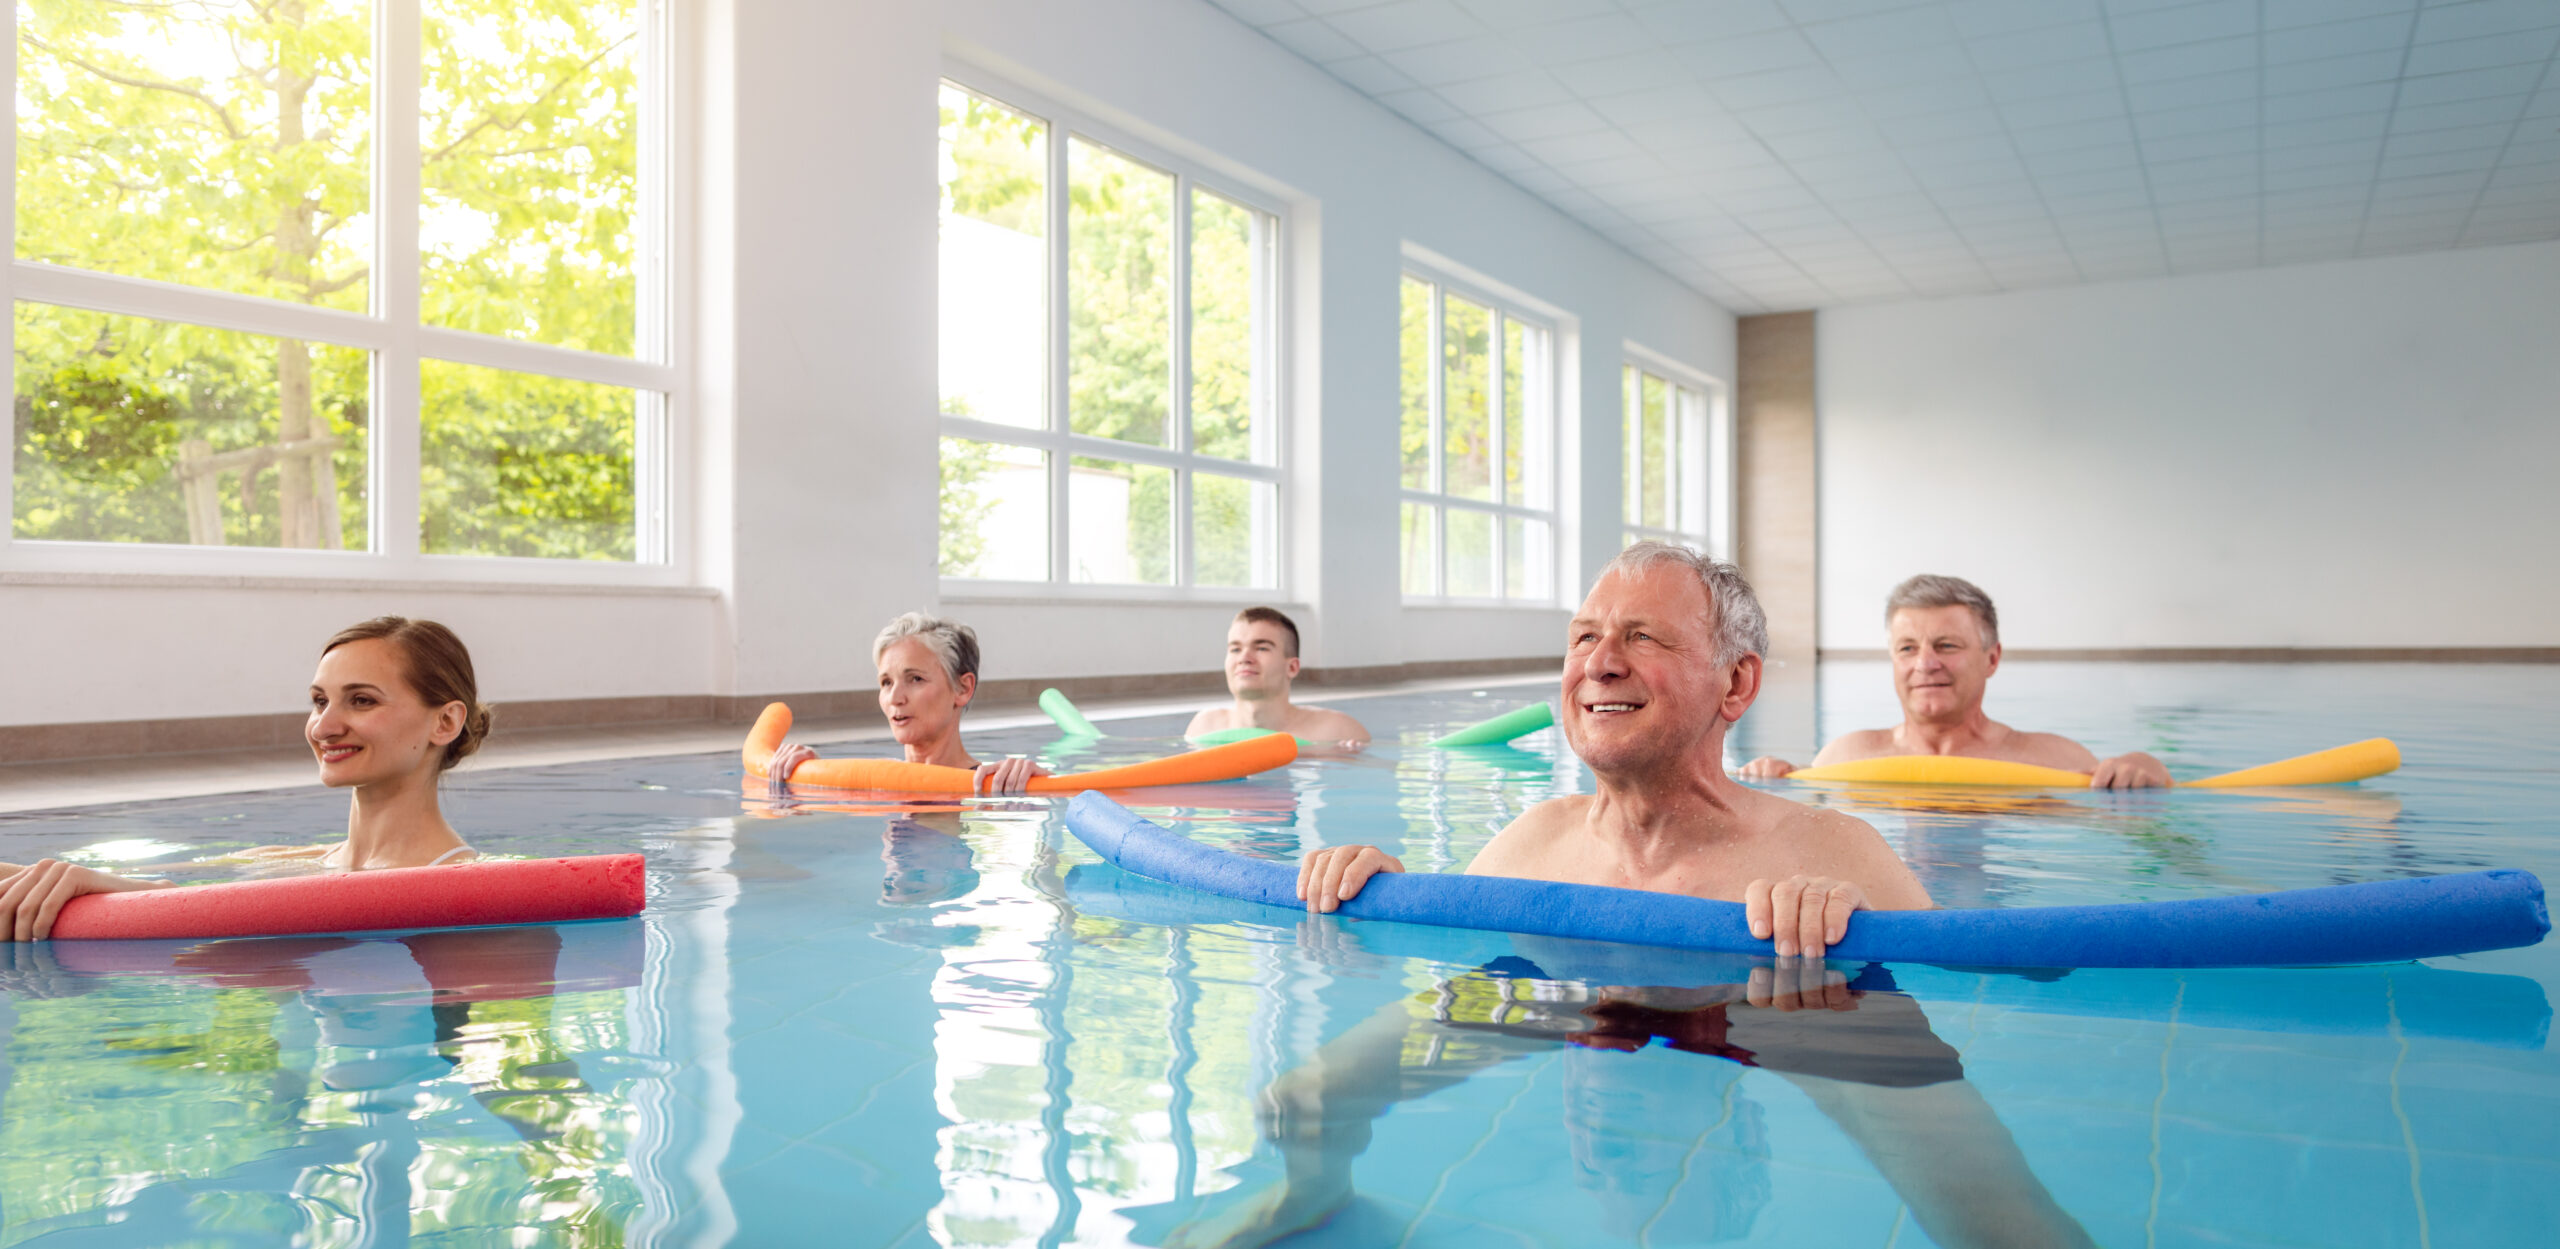 Hydrotherapy Classes at The Next Step Physio